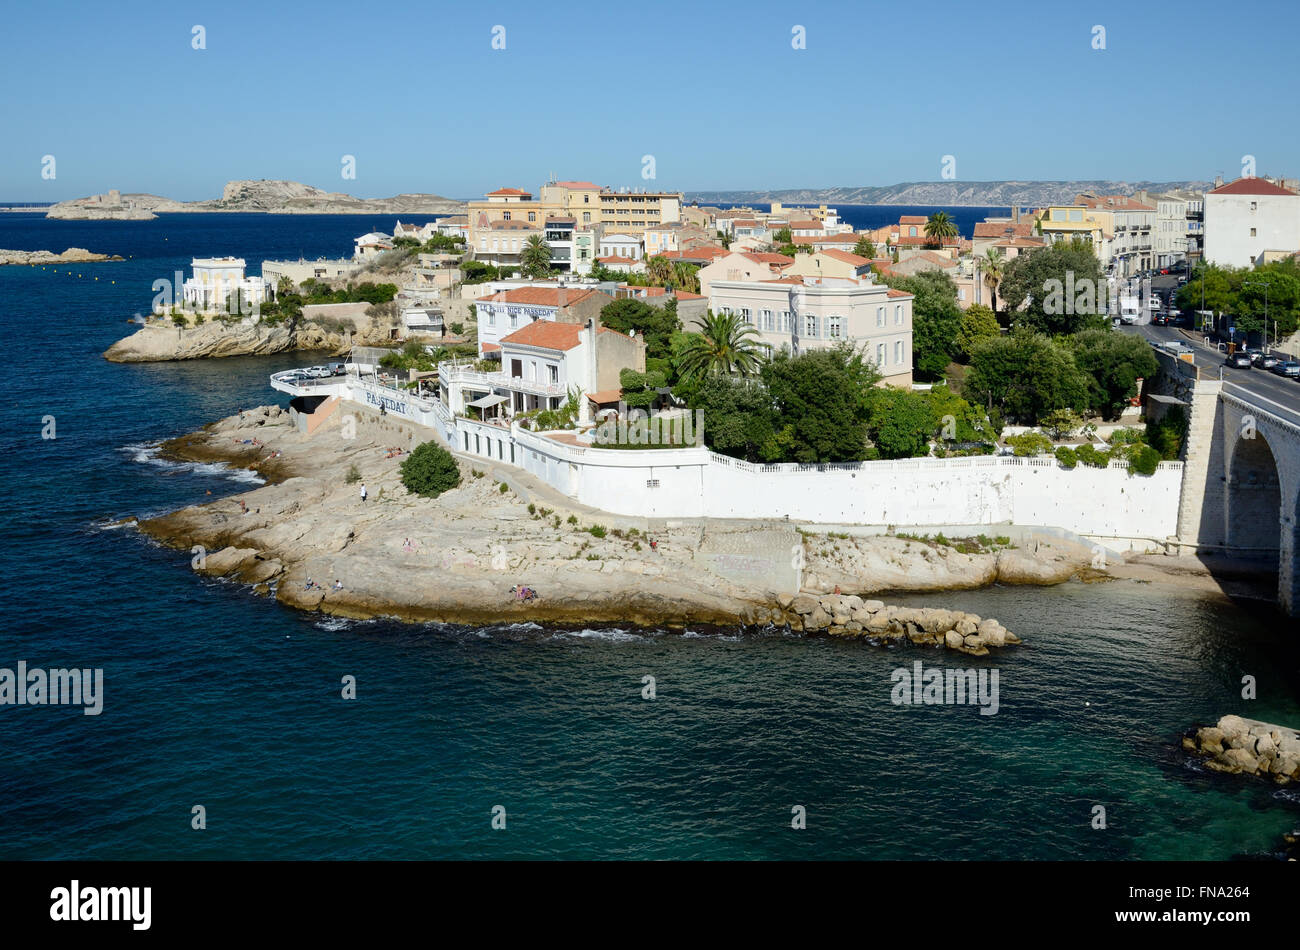 Sea View of Petit Nice Restaurant Anse de la Fausse Monnaie on the Corniche Road or Waterfront Marseille Provence France Stock Photo